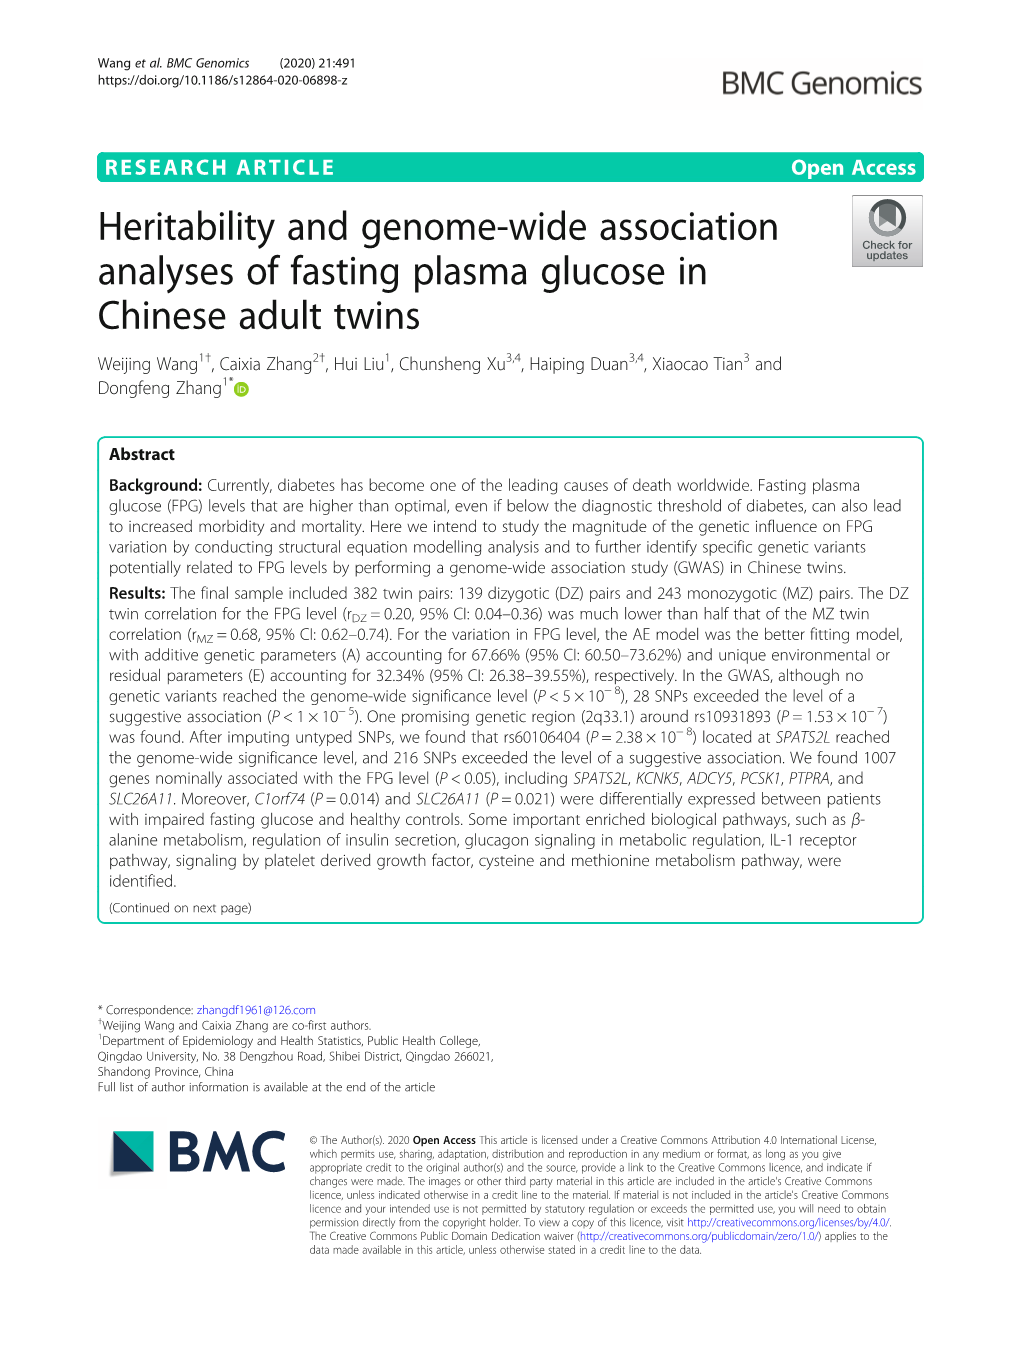 Heritability and Genome-Wide Association Analyses of Fasting